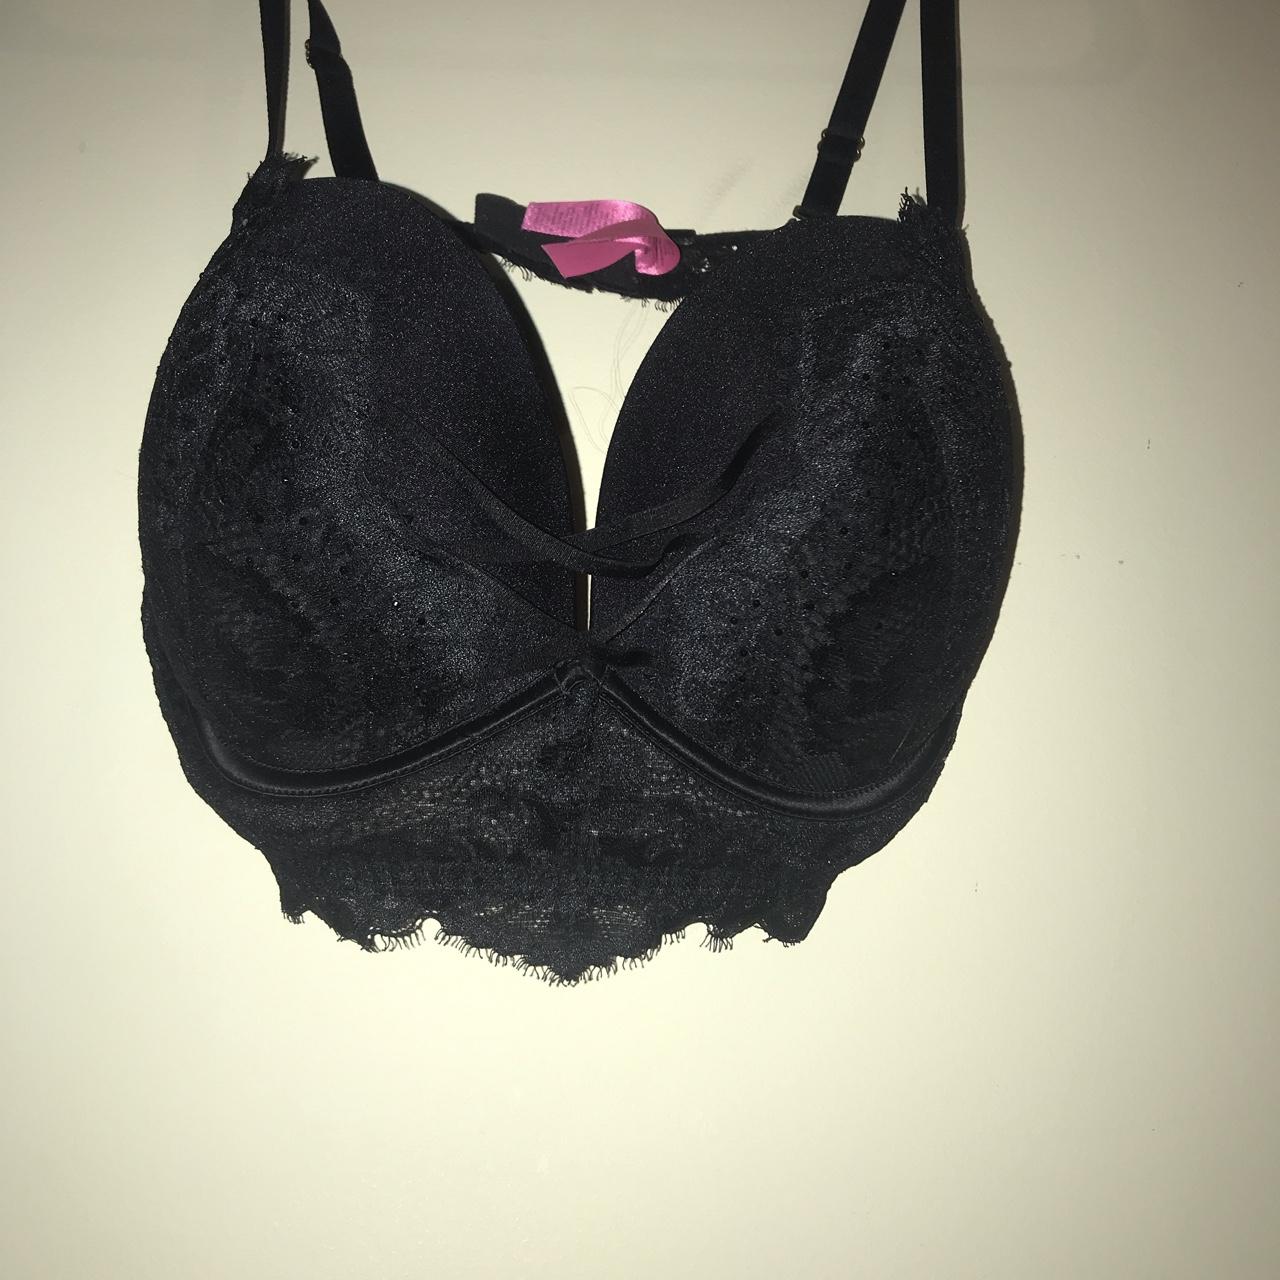 Bra For A Cause sells out